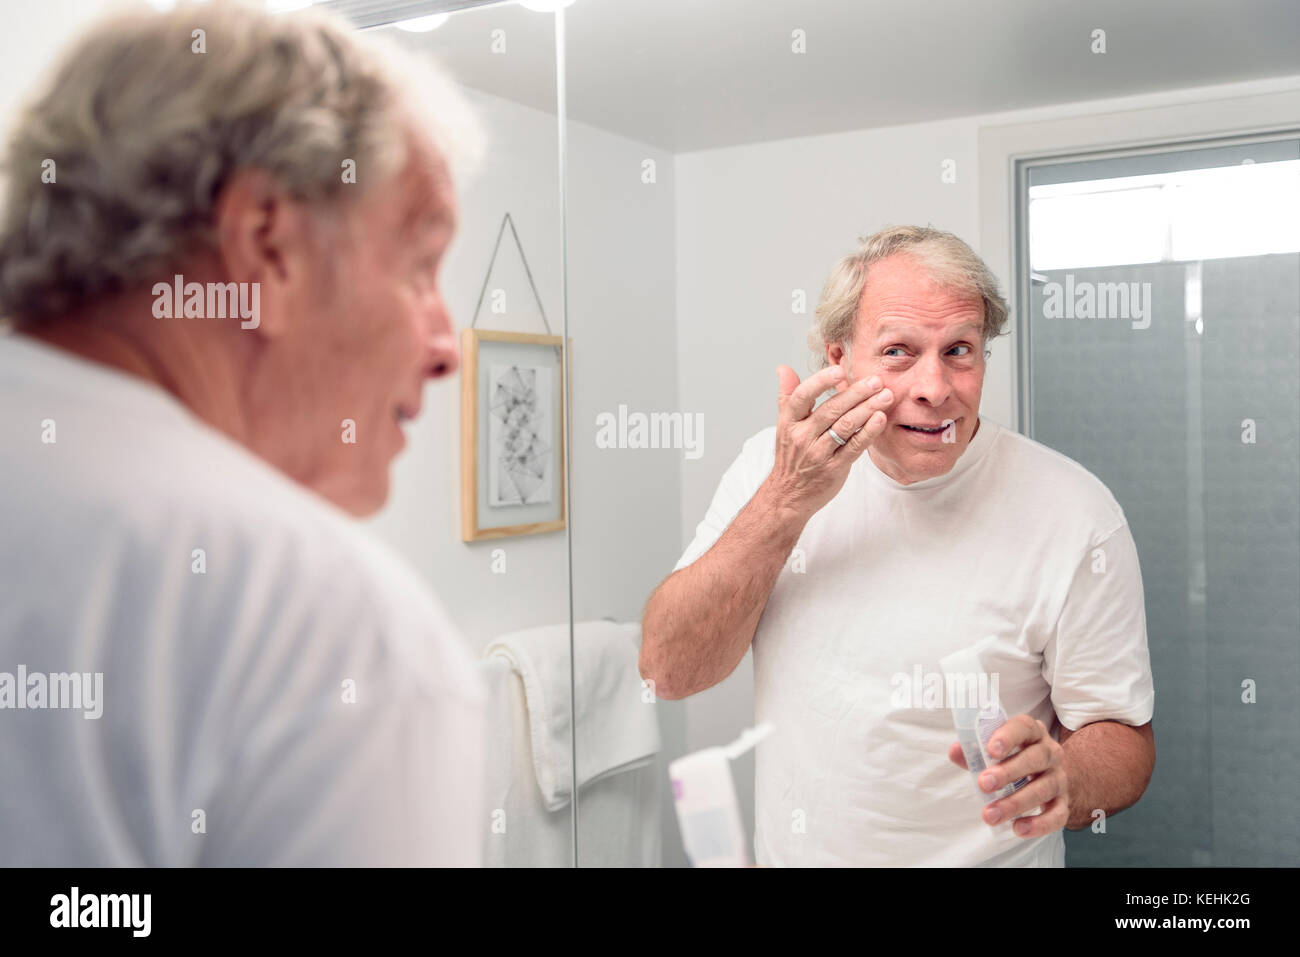 Caucasian man applying lotion to face in mirror Stock Photo